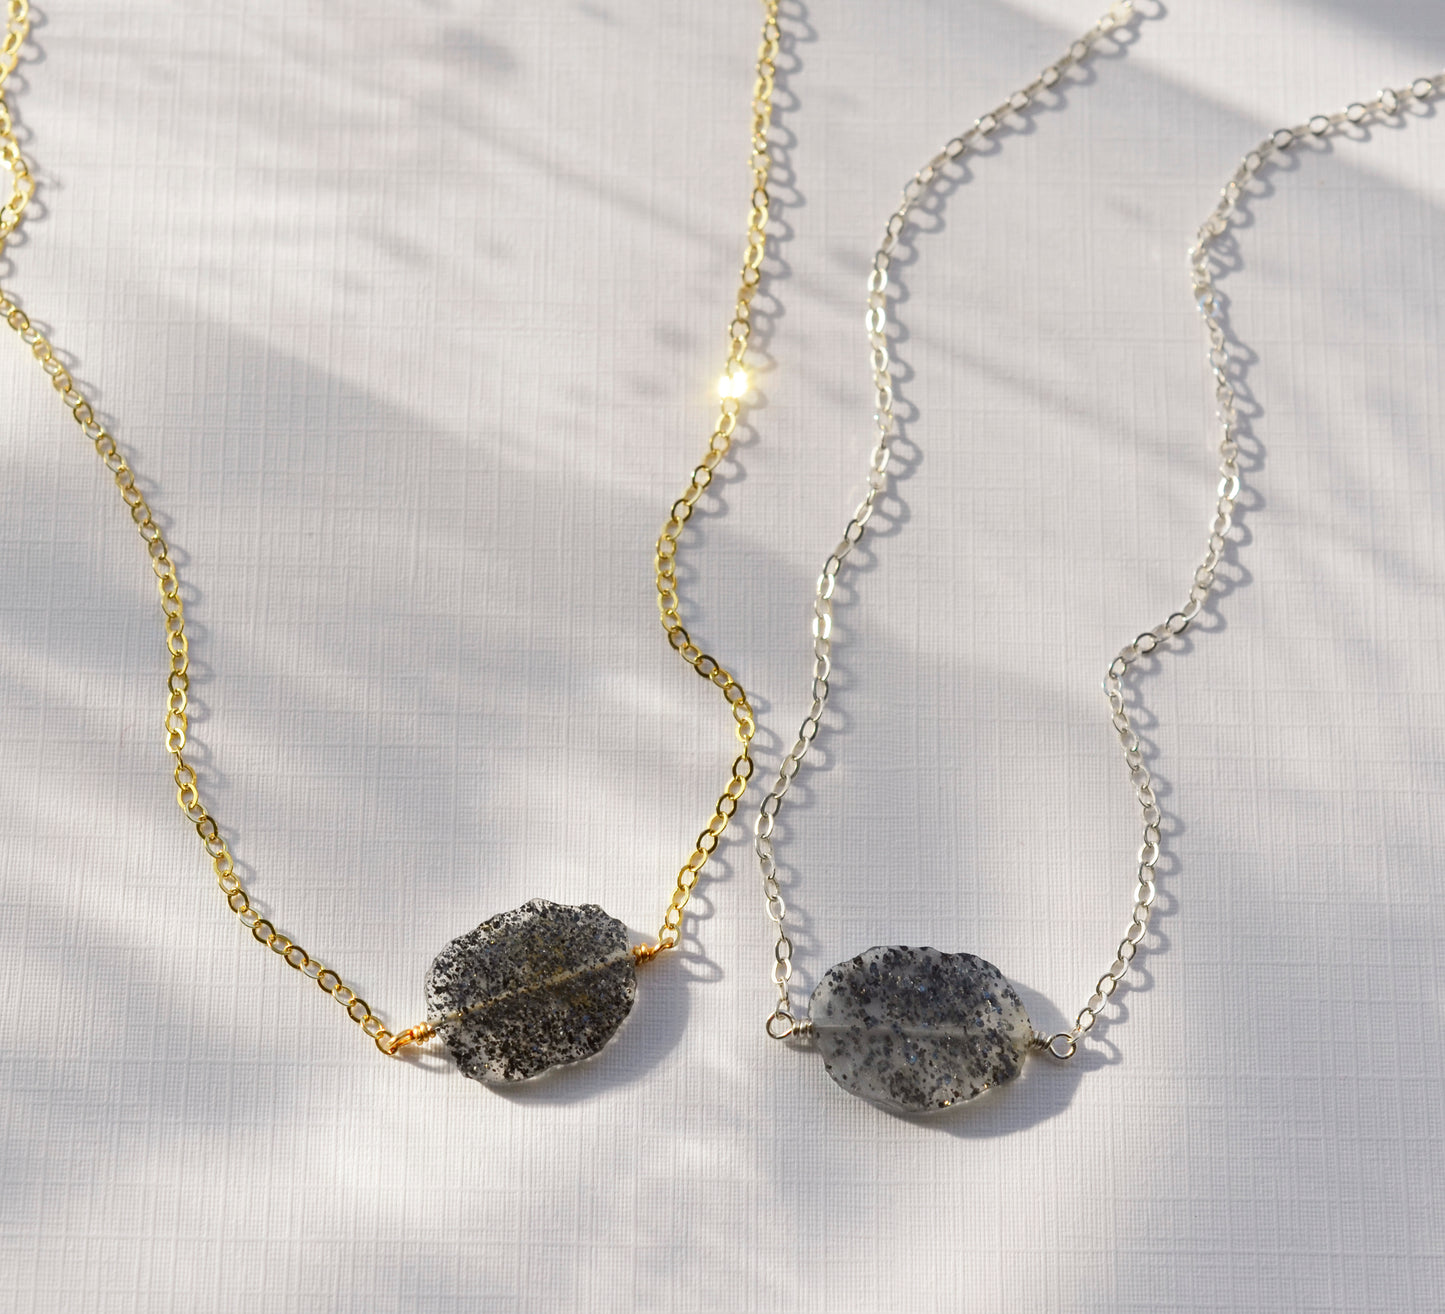 Black sunstone slice pendants shown on a sterling silver and a 14k gold filled chain.